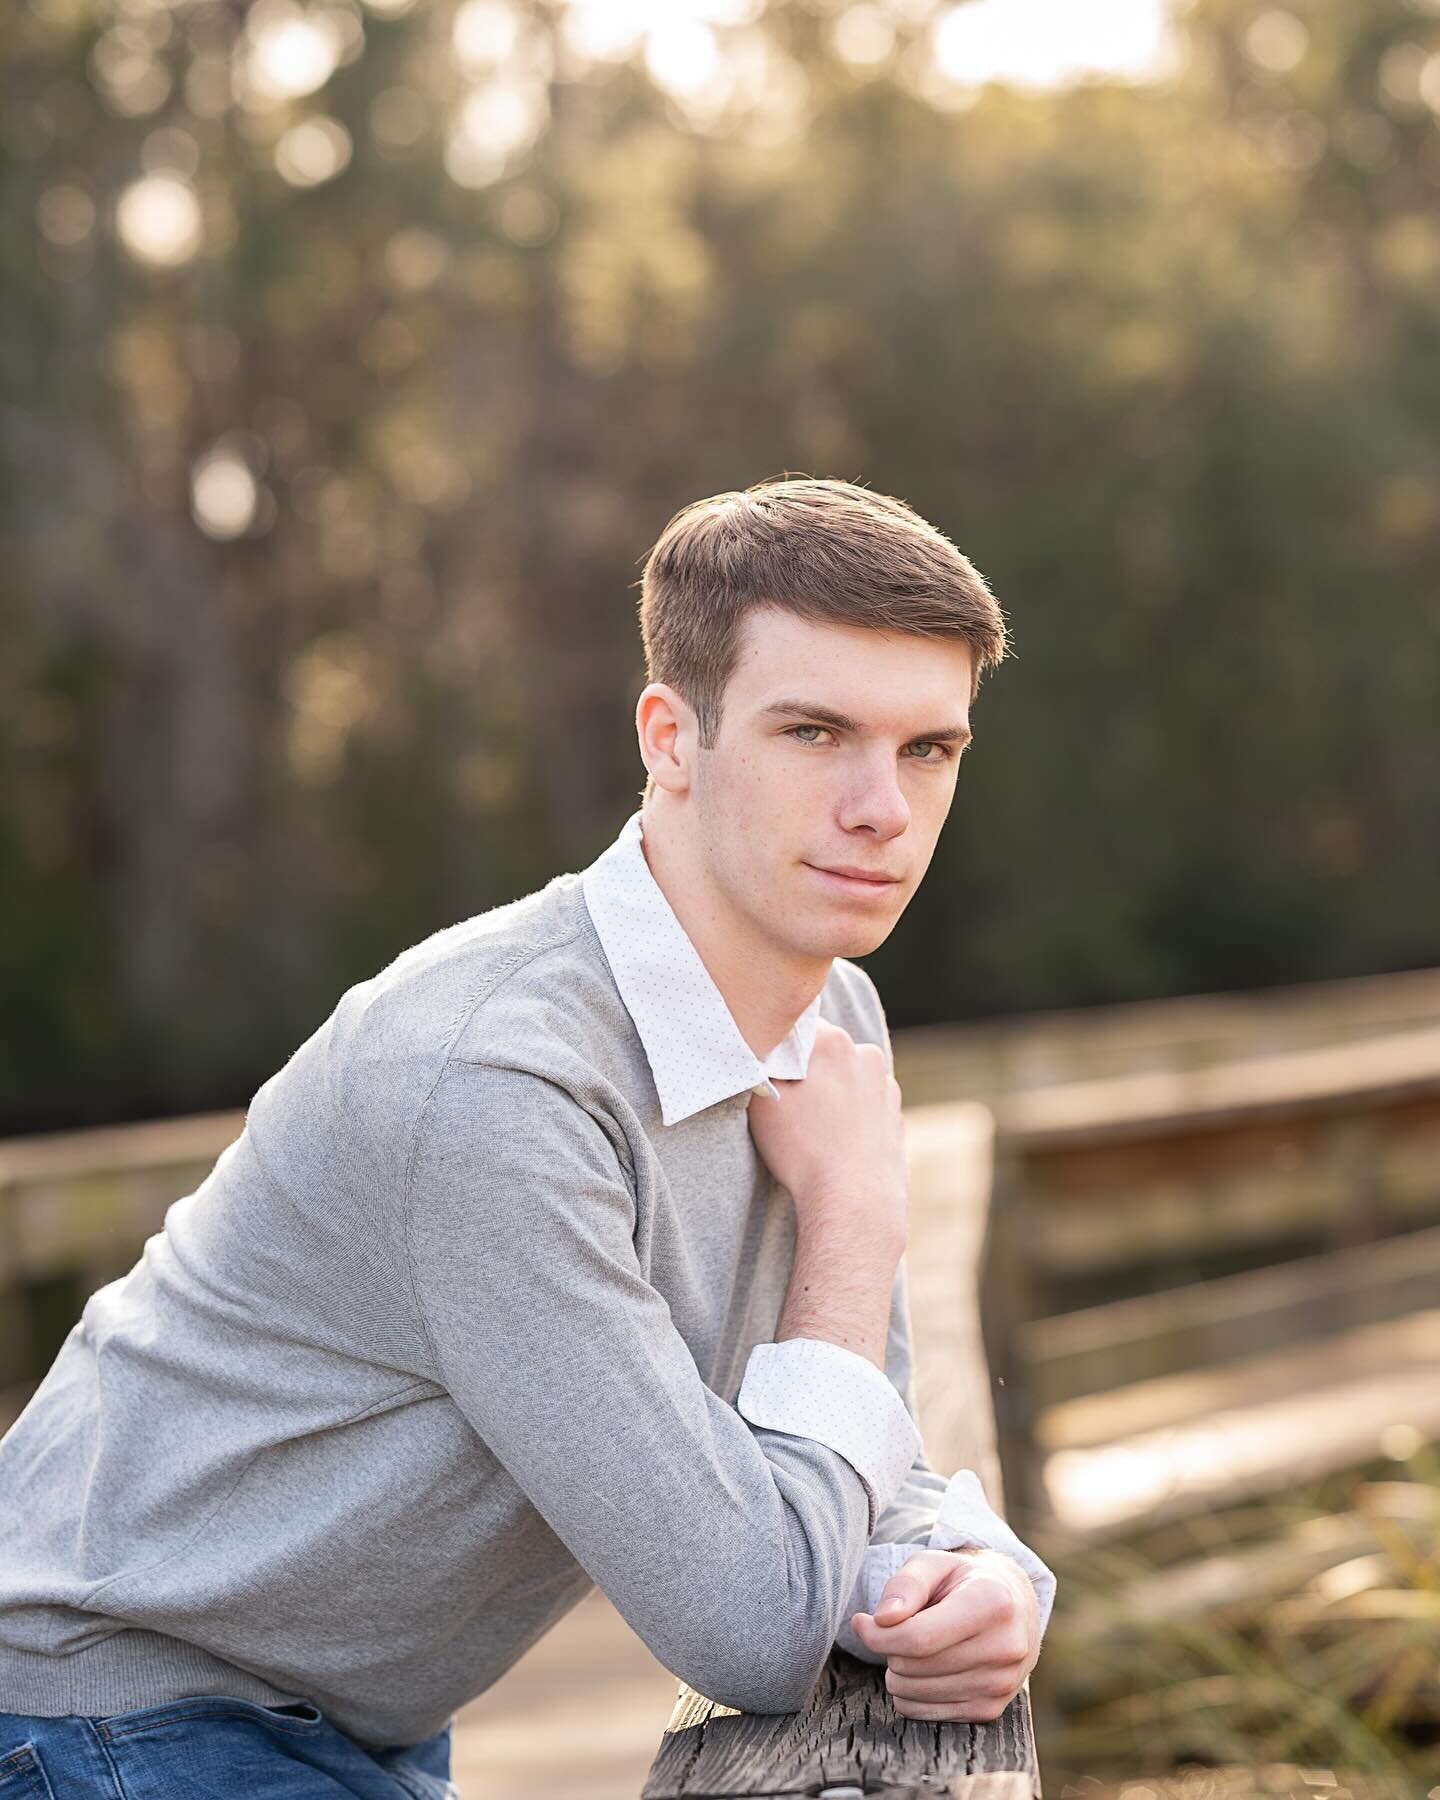 I&rsquo;m not gonna lie&hellip;I LOVE photographing senior guys even though most of the time my senior guys hate the idea of doing their photos and are just doing it for Mom. As a boy mom I can appreciate that they&rsquo;re doing it for her! 

I enjo